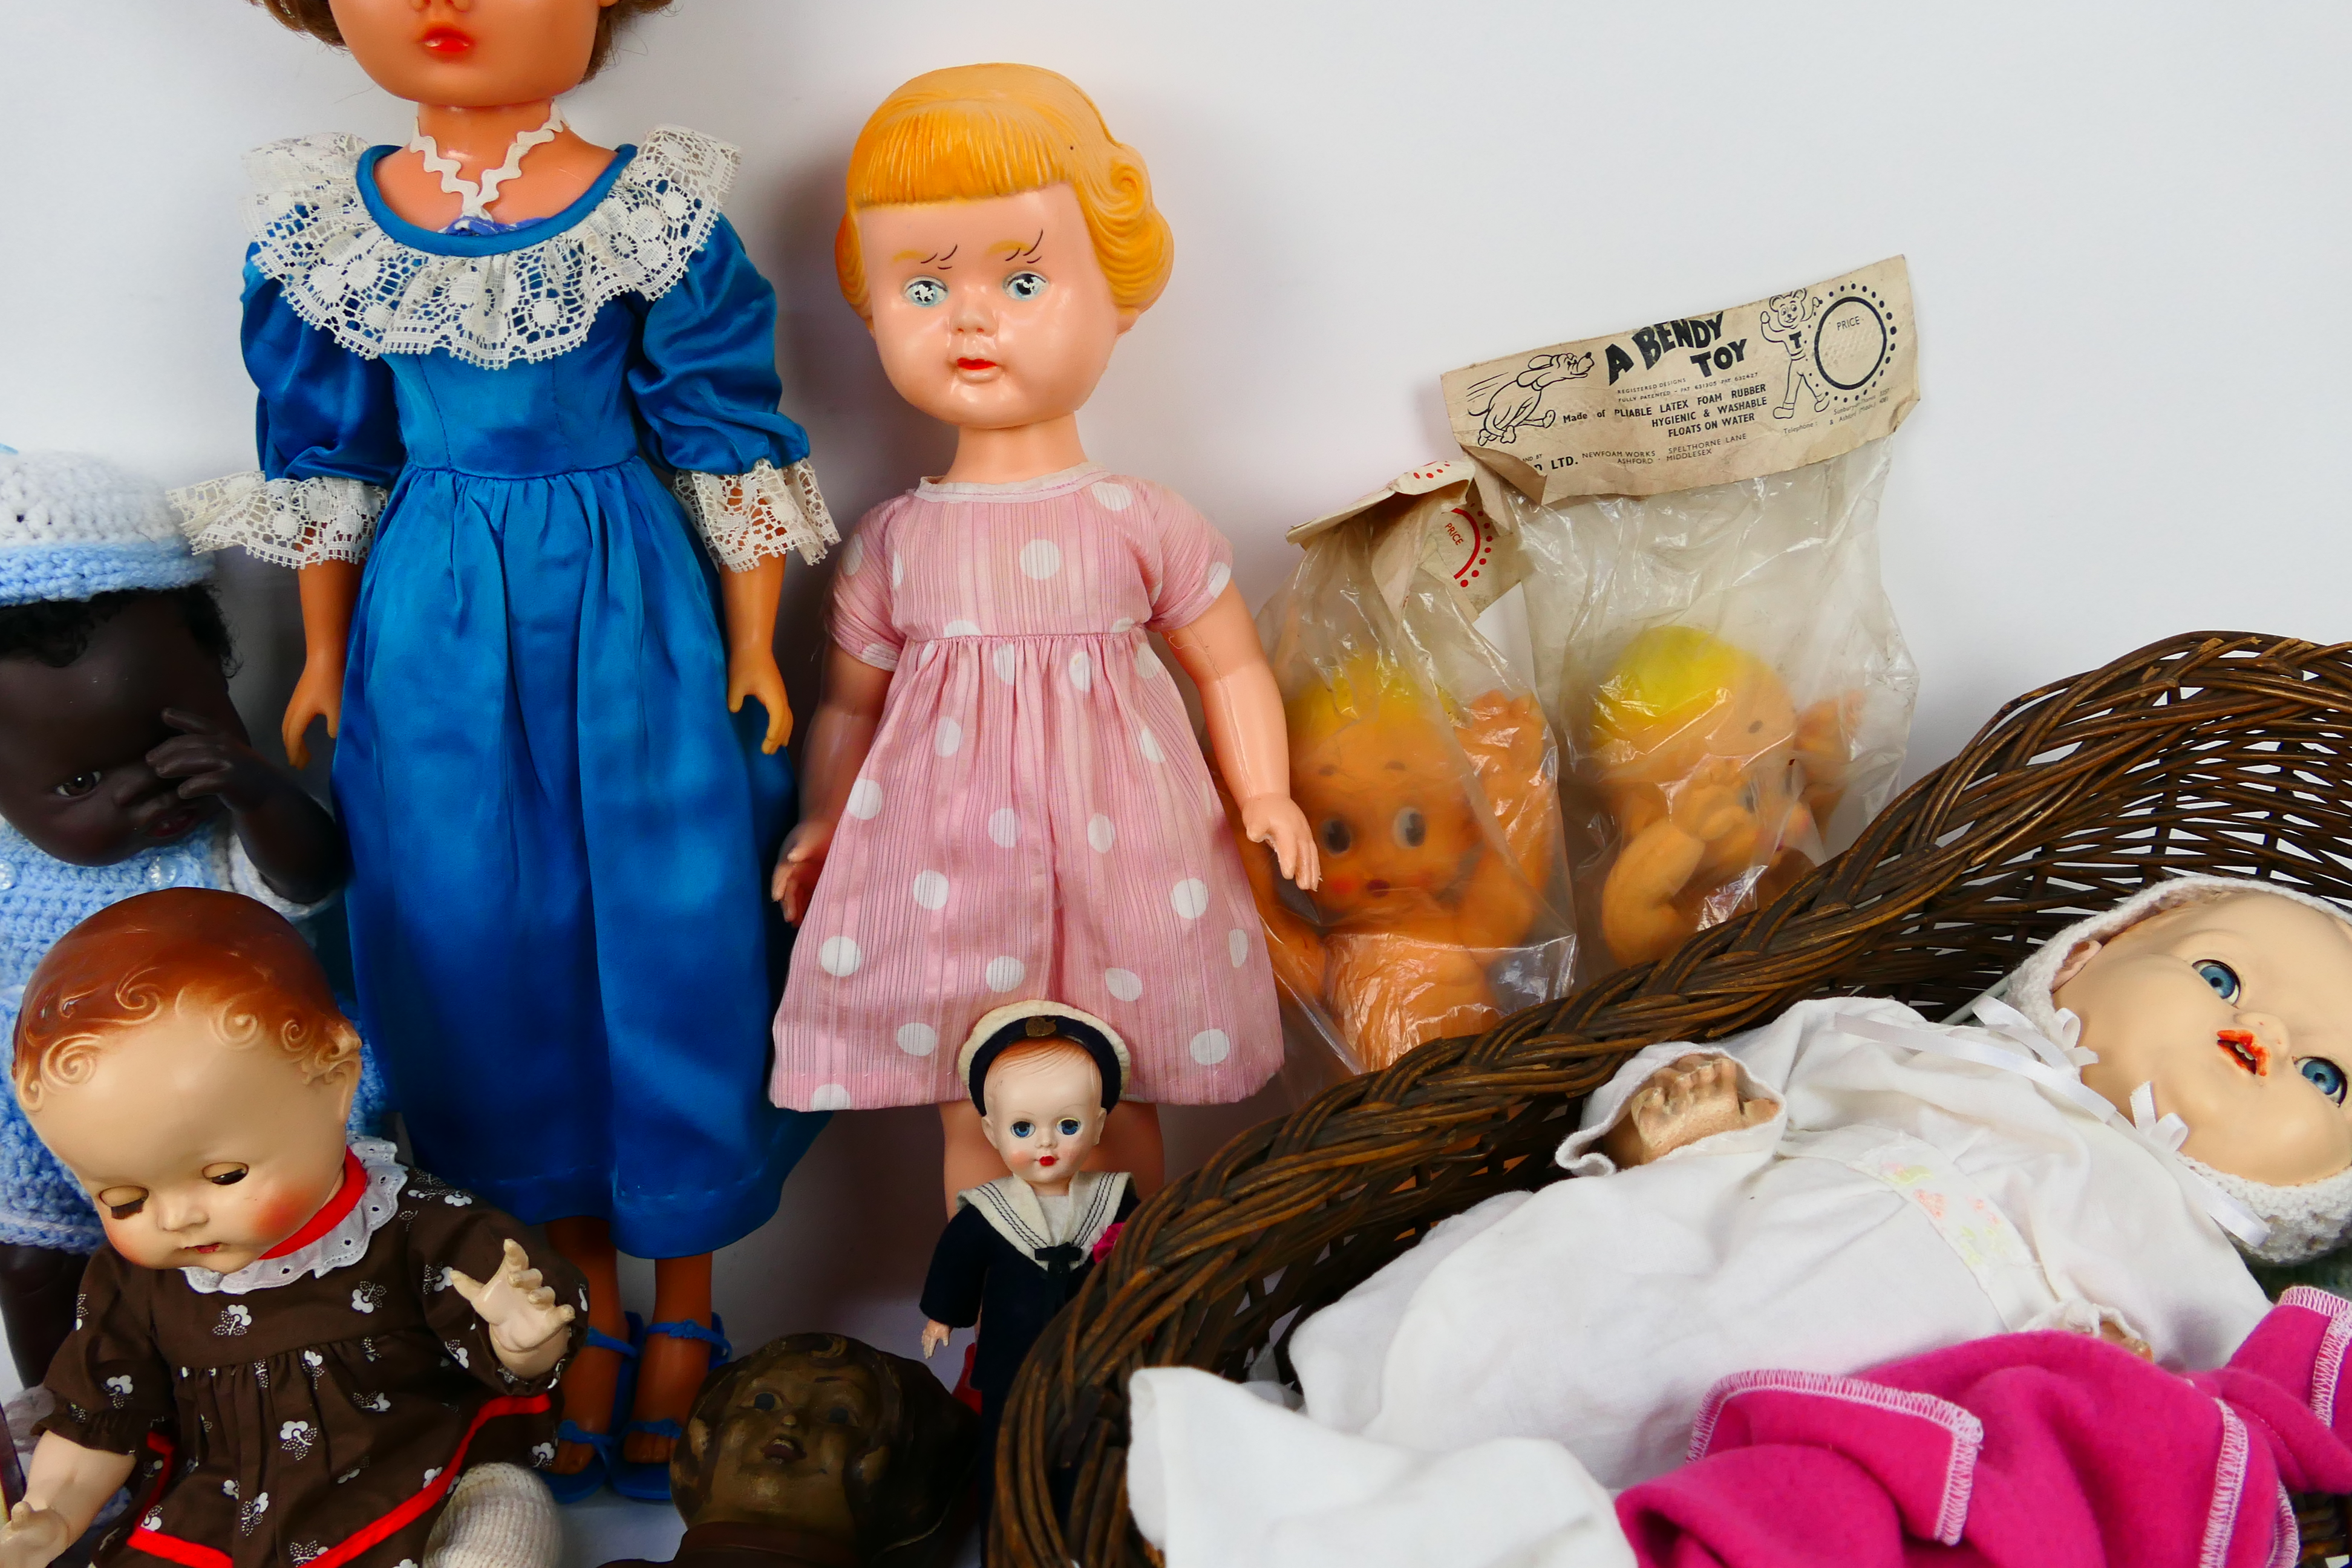 Pedigree - Roddy - Celluko - Others - A mixed collection of vintage dolls and toys made from - Image 4 of 6